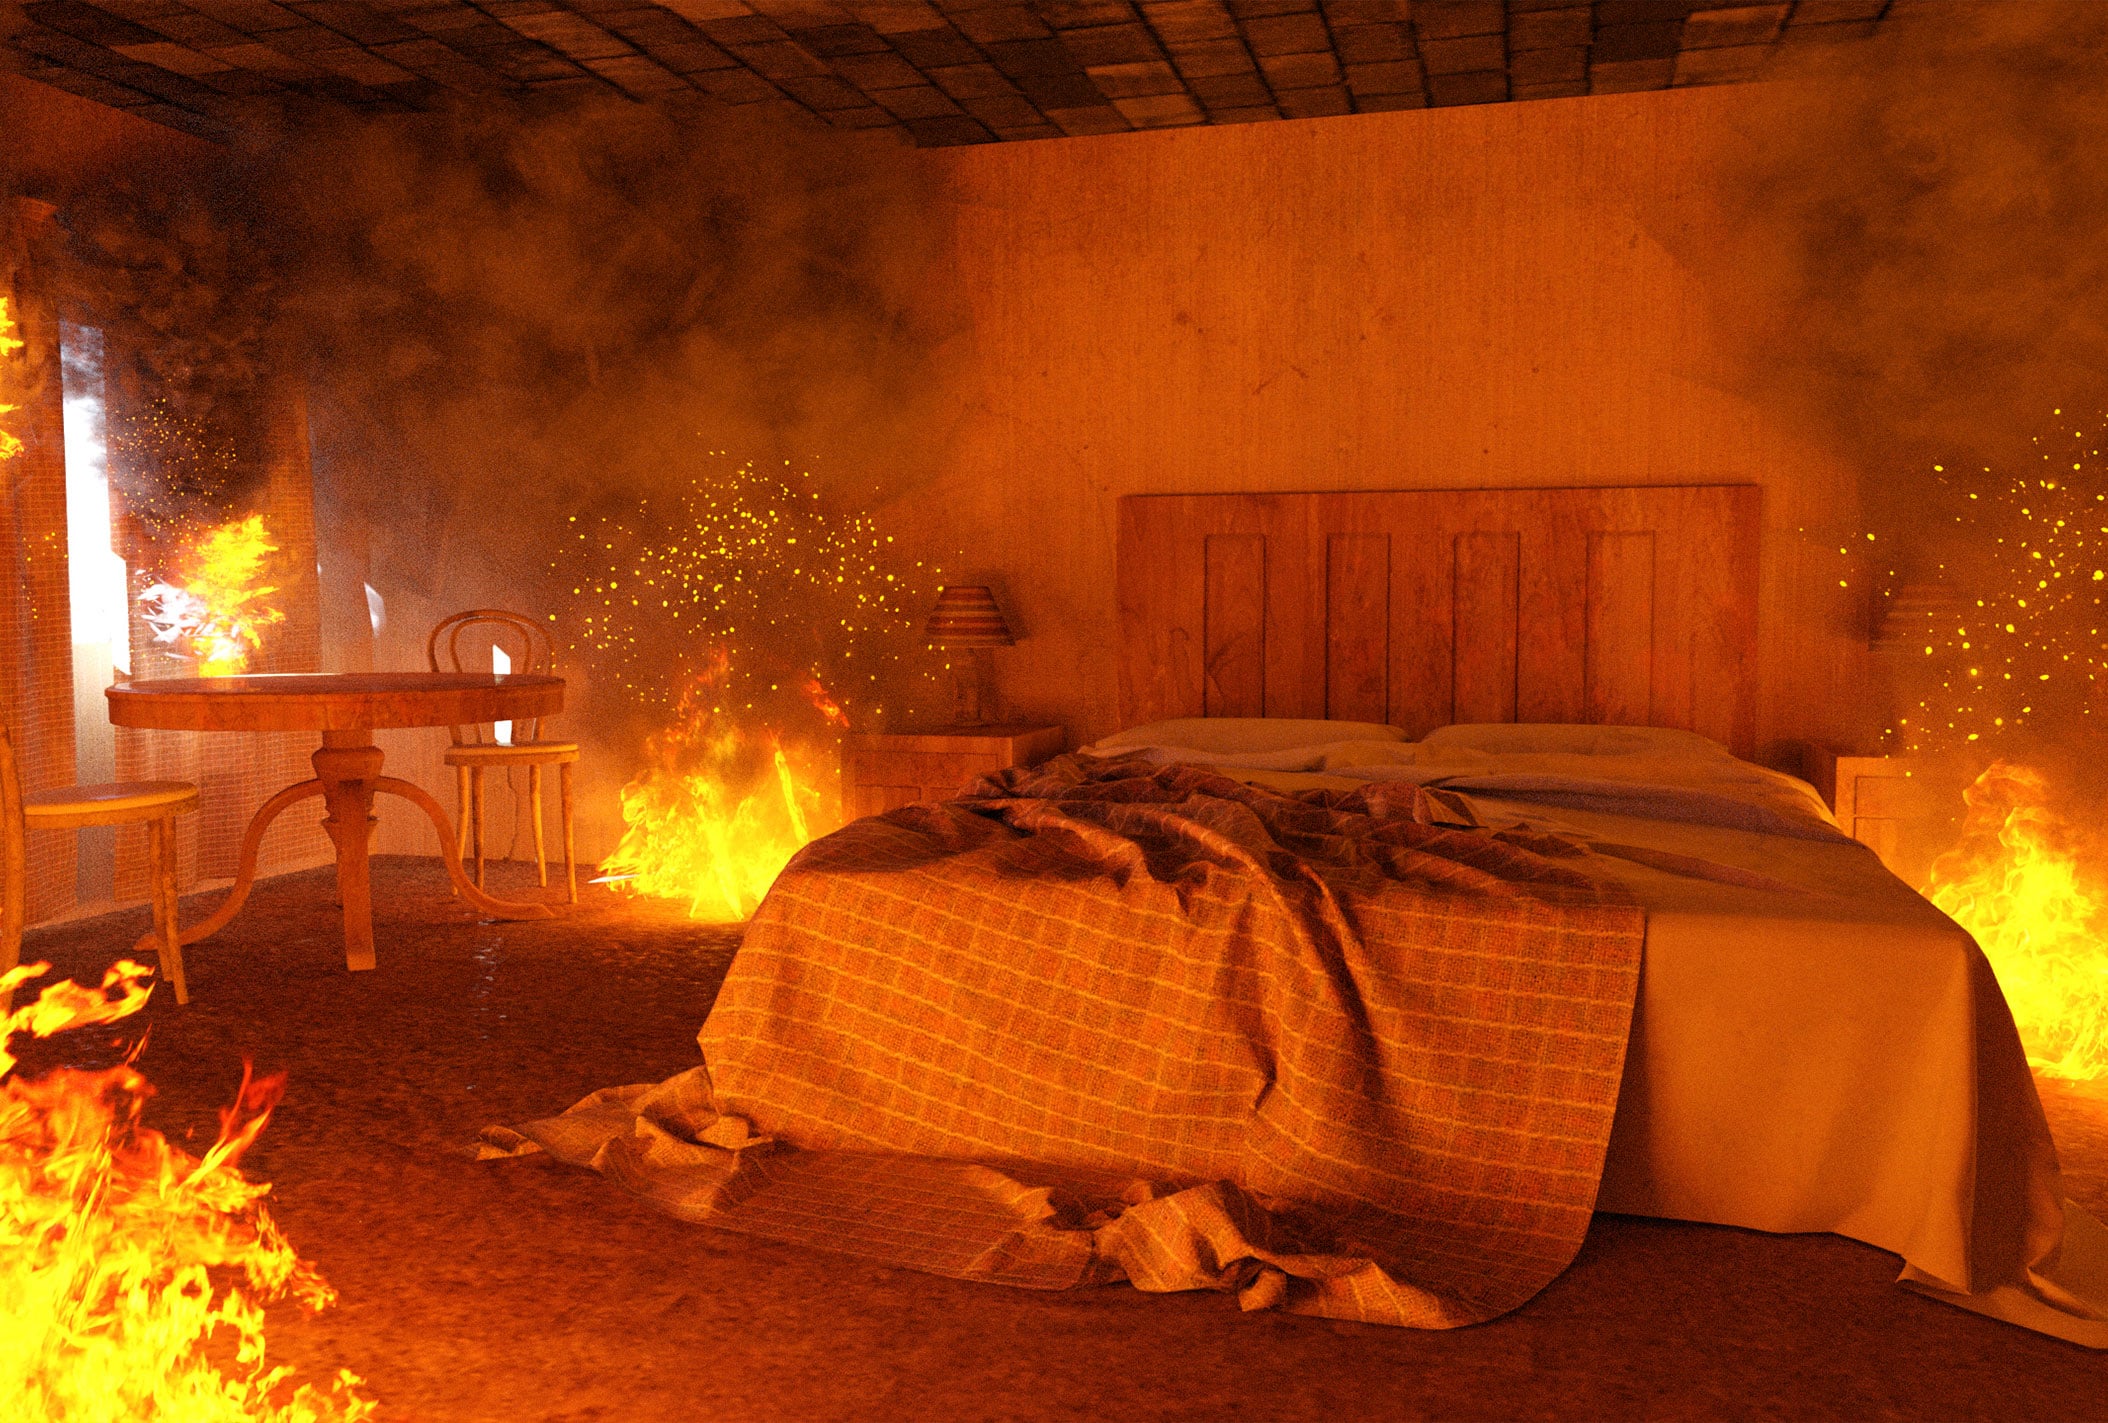 Bedroom on fire image